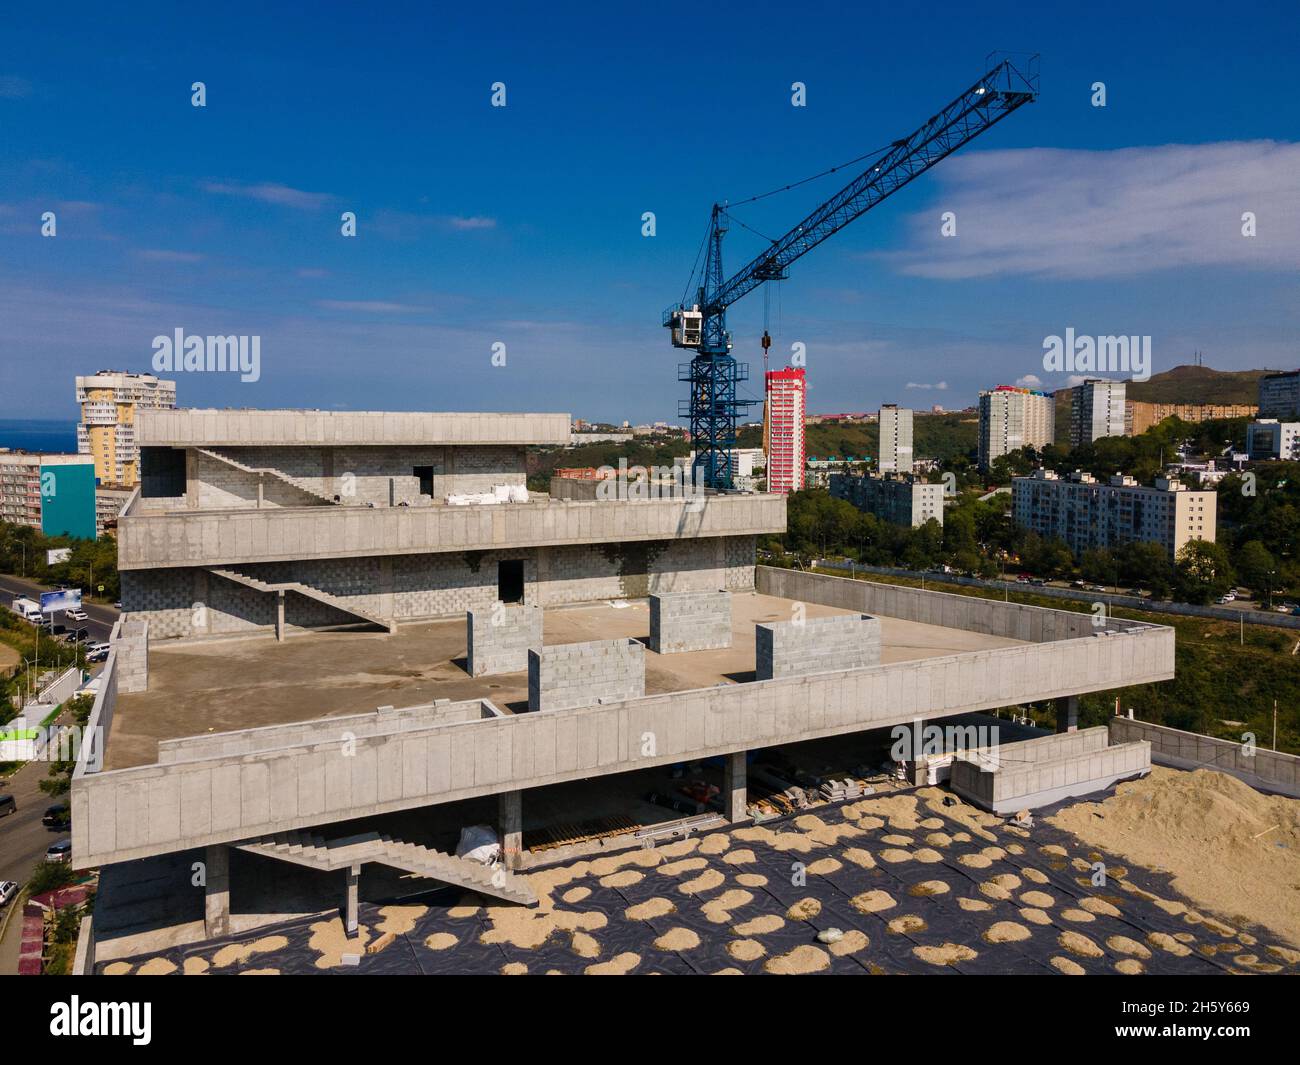 A large gray building under construction in the city. Blue construction crane near the construction site. Stock Photo